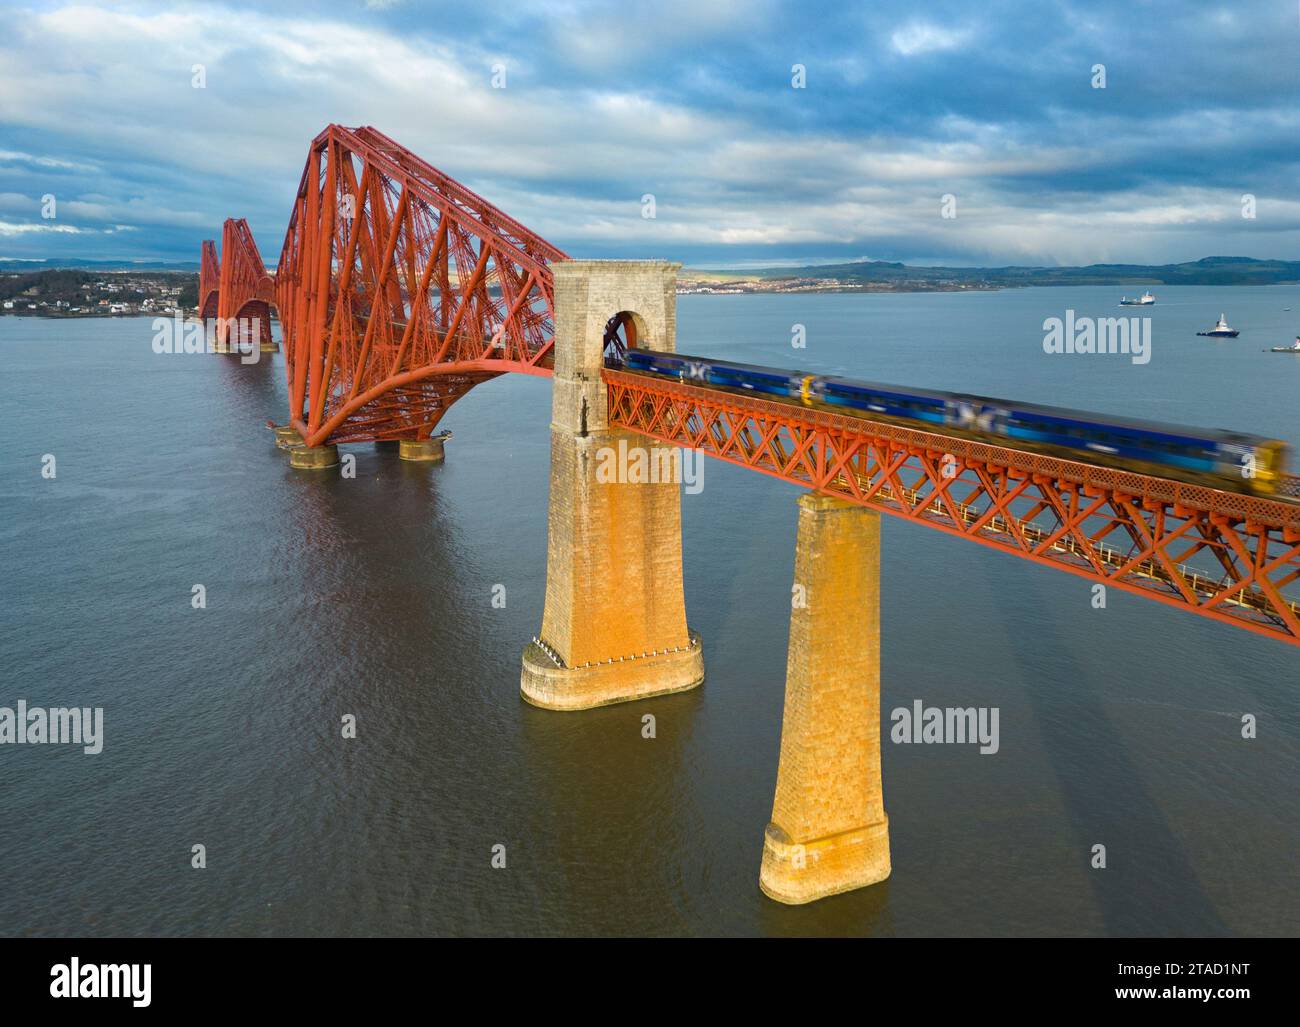 Aerial view of the Forth Bridge ( Forth railway bridge) crossing Firth of Forth at South Queensferry, Scotland, UK Stock Photo